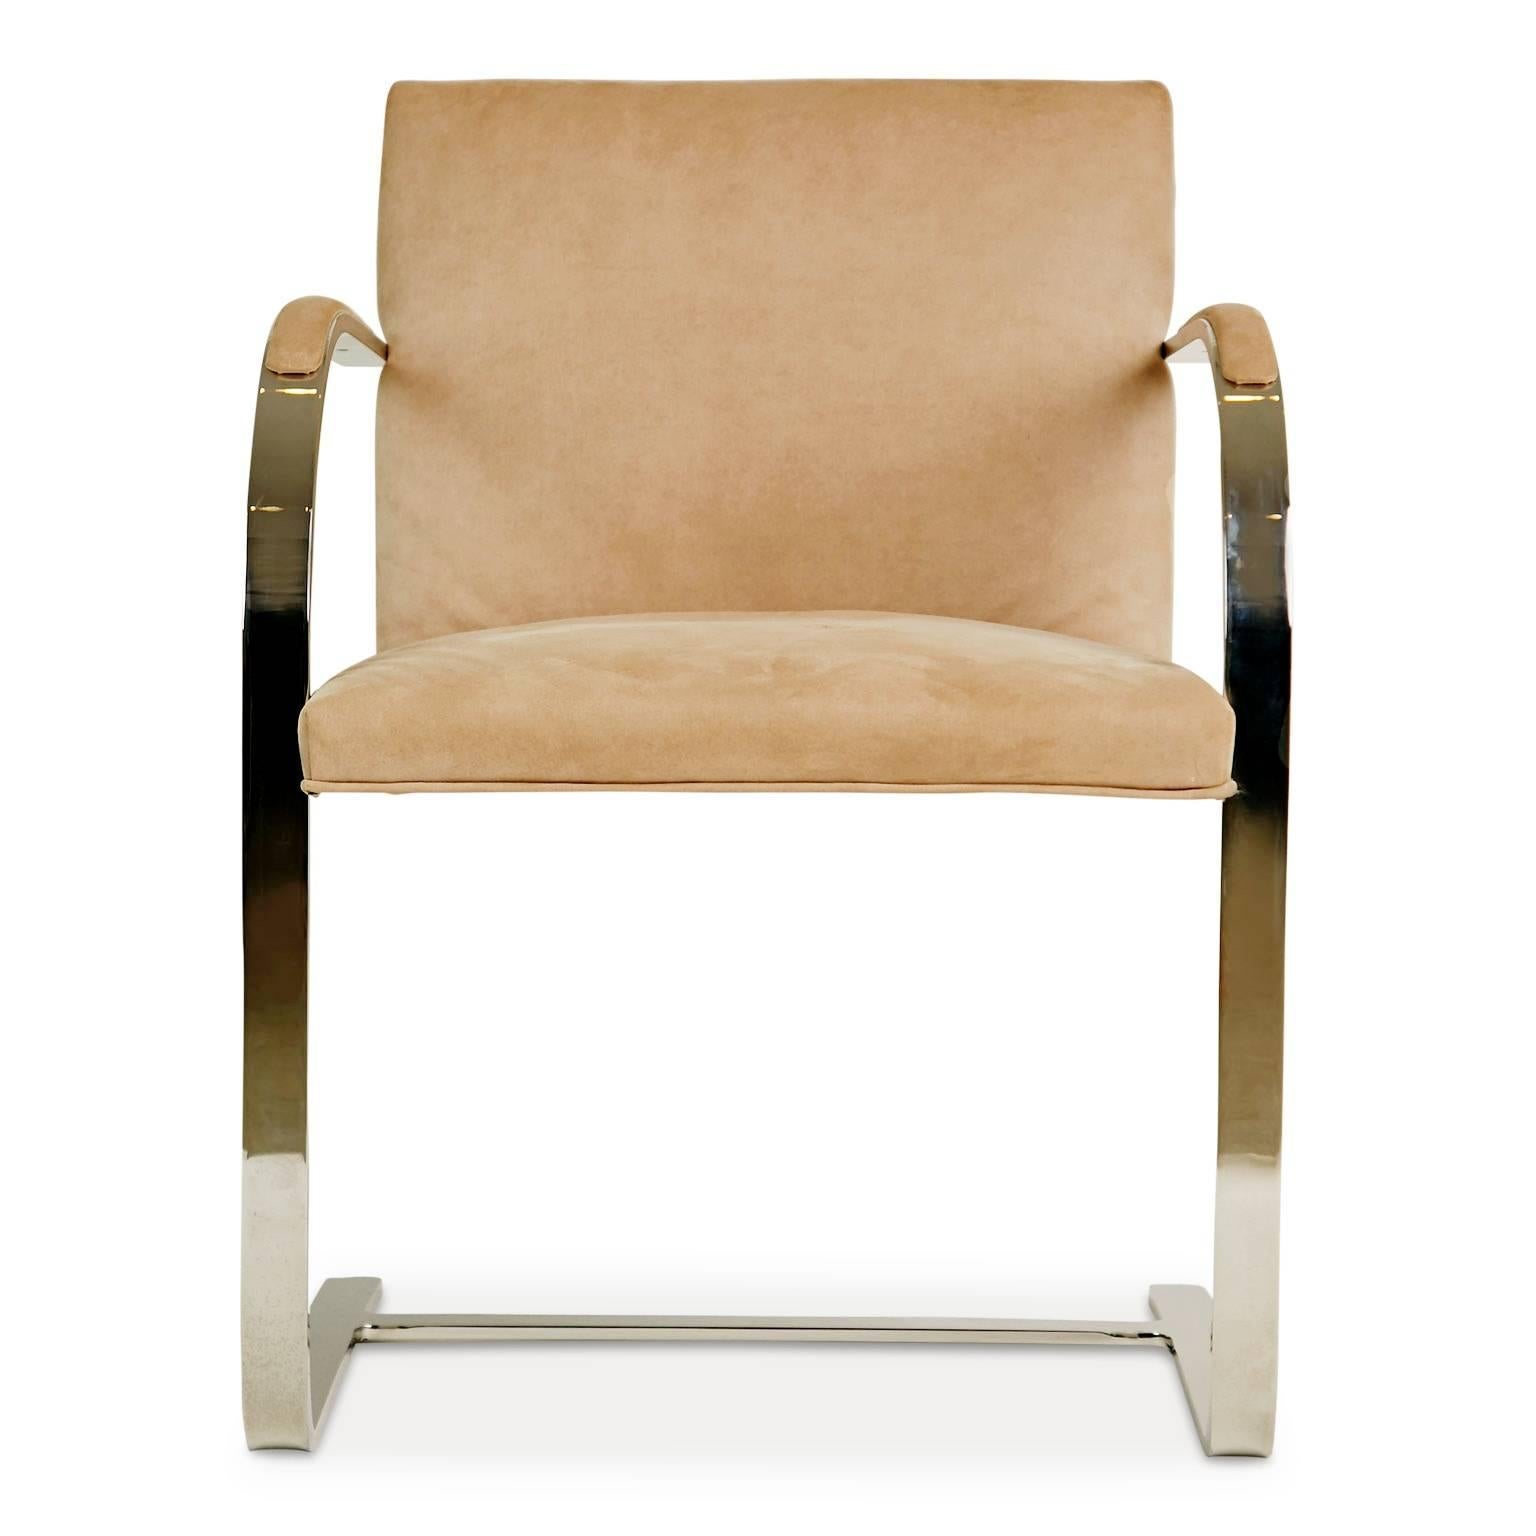 A striking set of six flat-bar armchairs by Brueton featuring sleekly designed chrome cantilever frames which form a graceful arch and are upholstered in a beige ultrasuede with undertones of peach. 

We also have a monumental circular dining